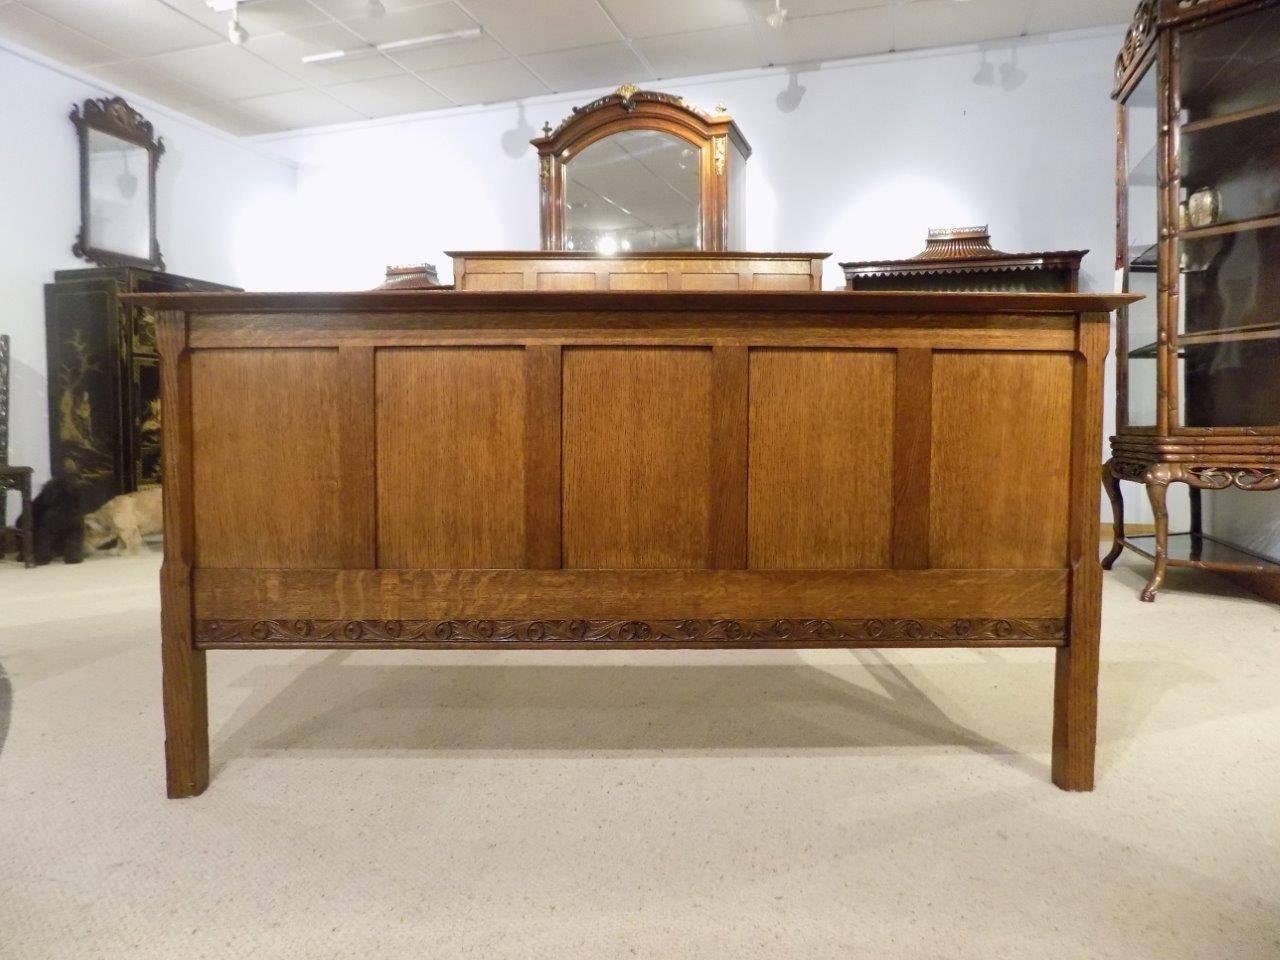 Early 20th Century Rare Oak Arts & Crafts Period Double Bed by Arthur Simpson of Kendal